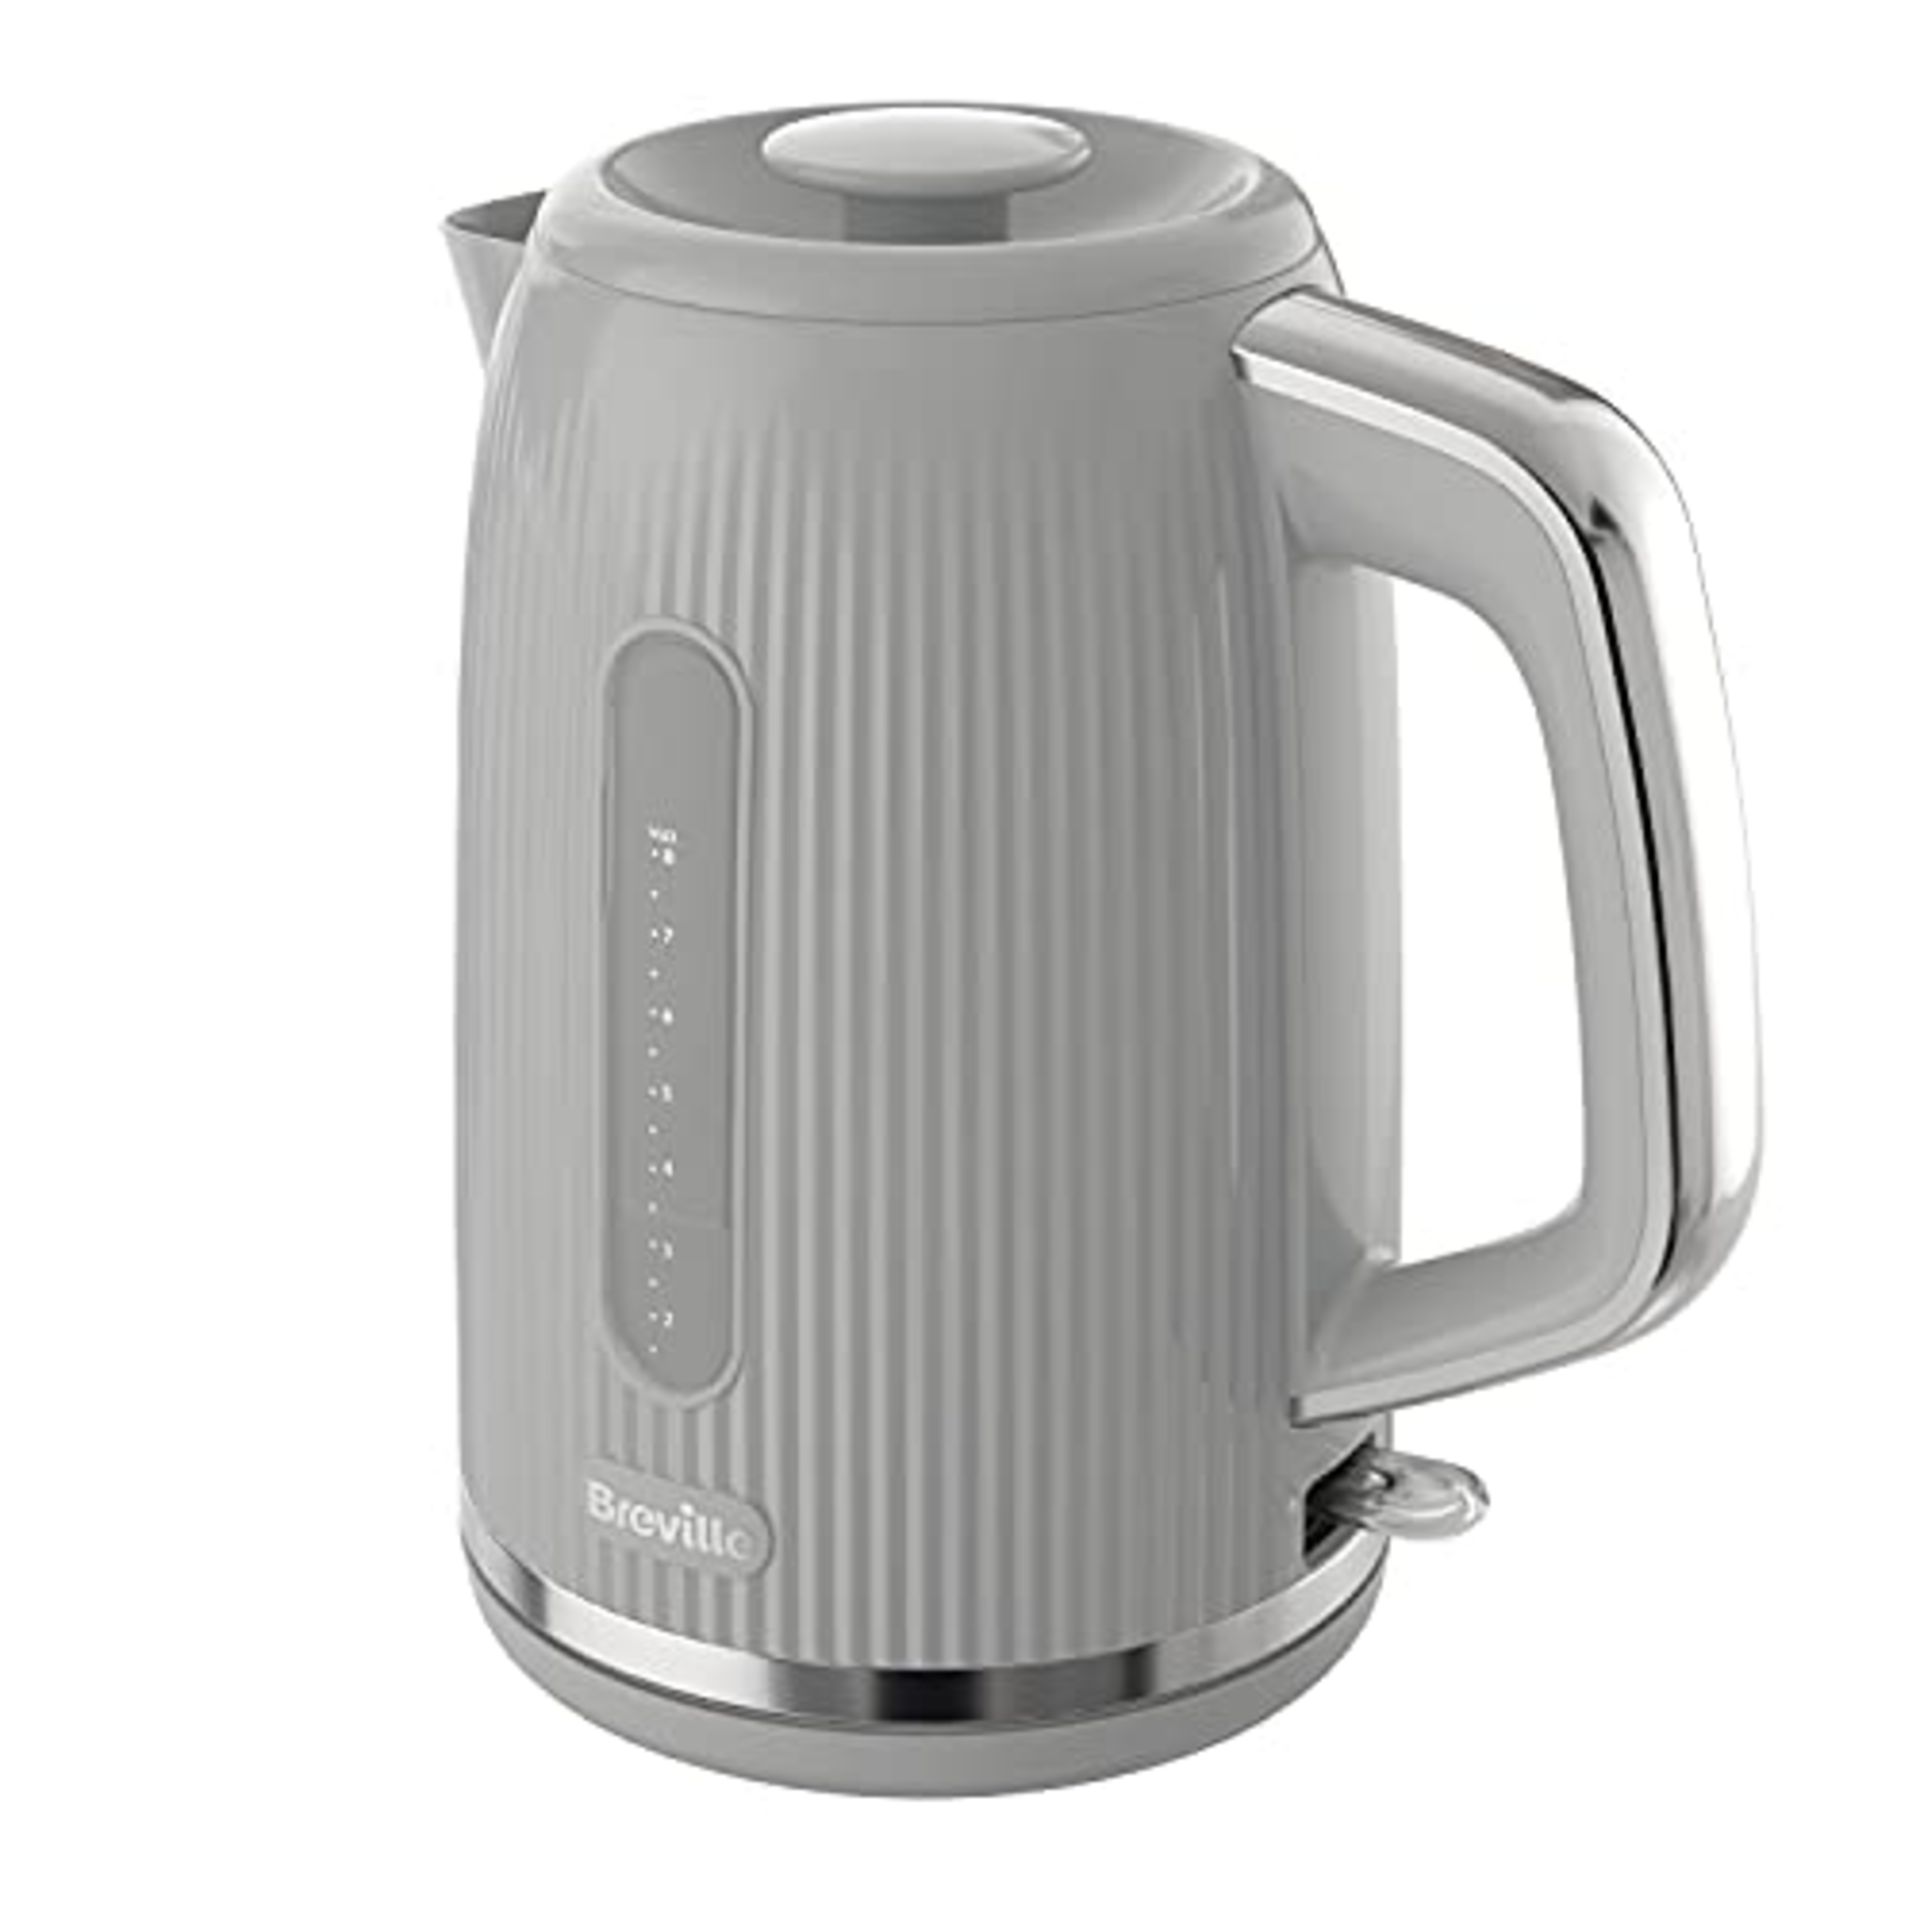 Breville Bold Ice Grey Electric Kettle | 1.7L | 3kW Fast Boil | Grey & Silver Chrome [